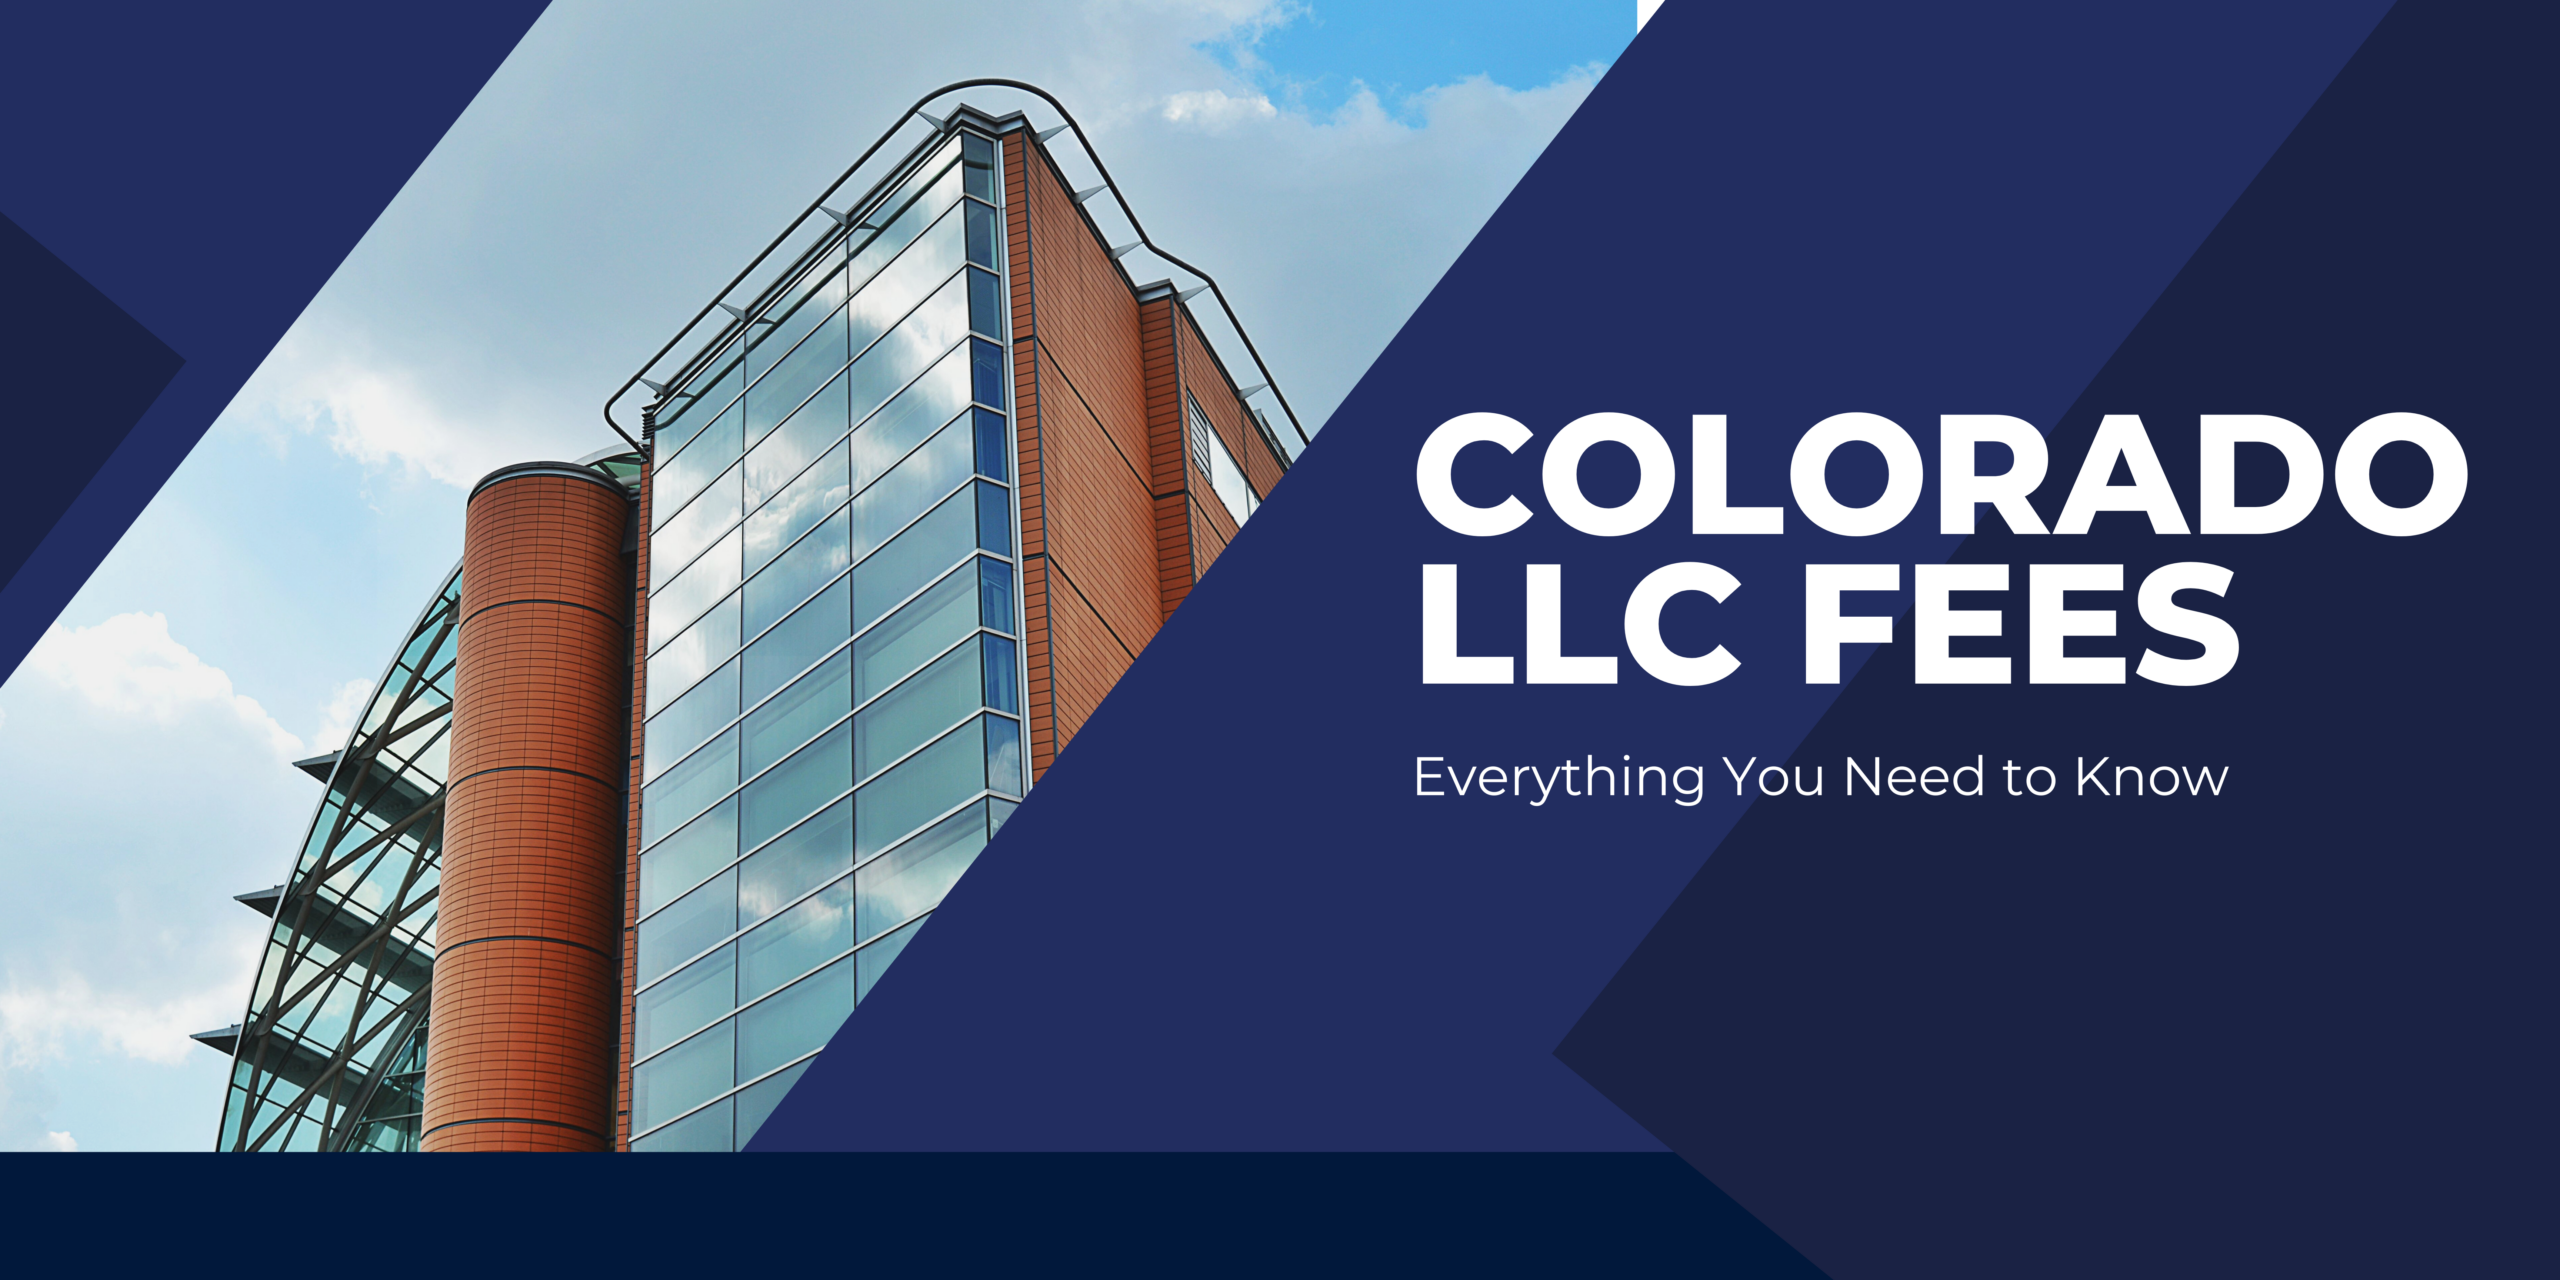 Colorado LLC Fees: Everything You Need to Know